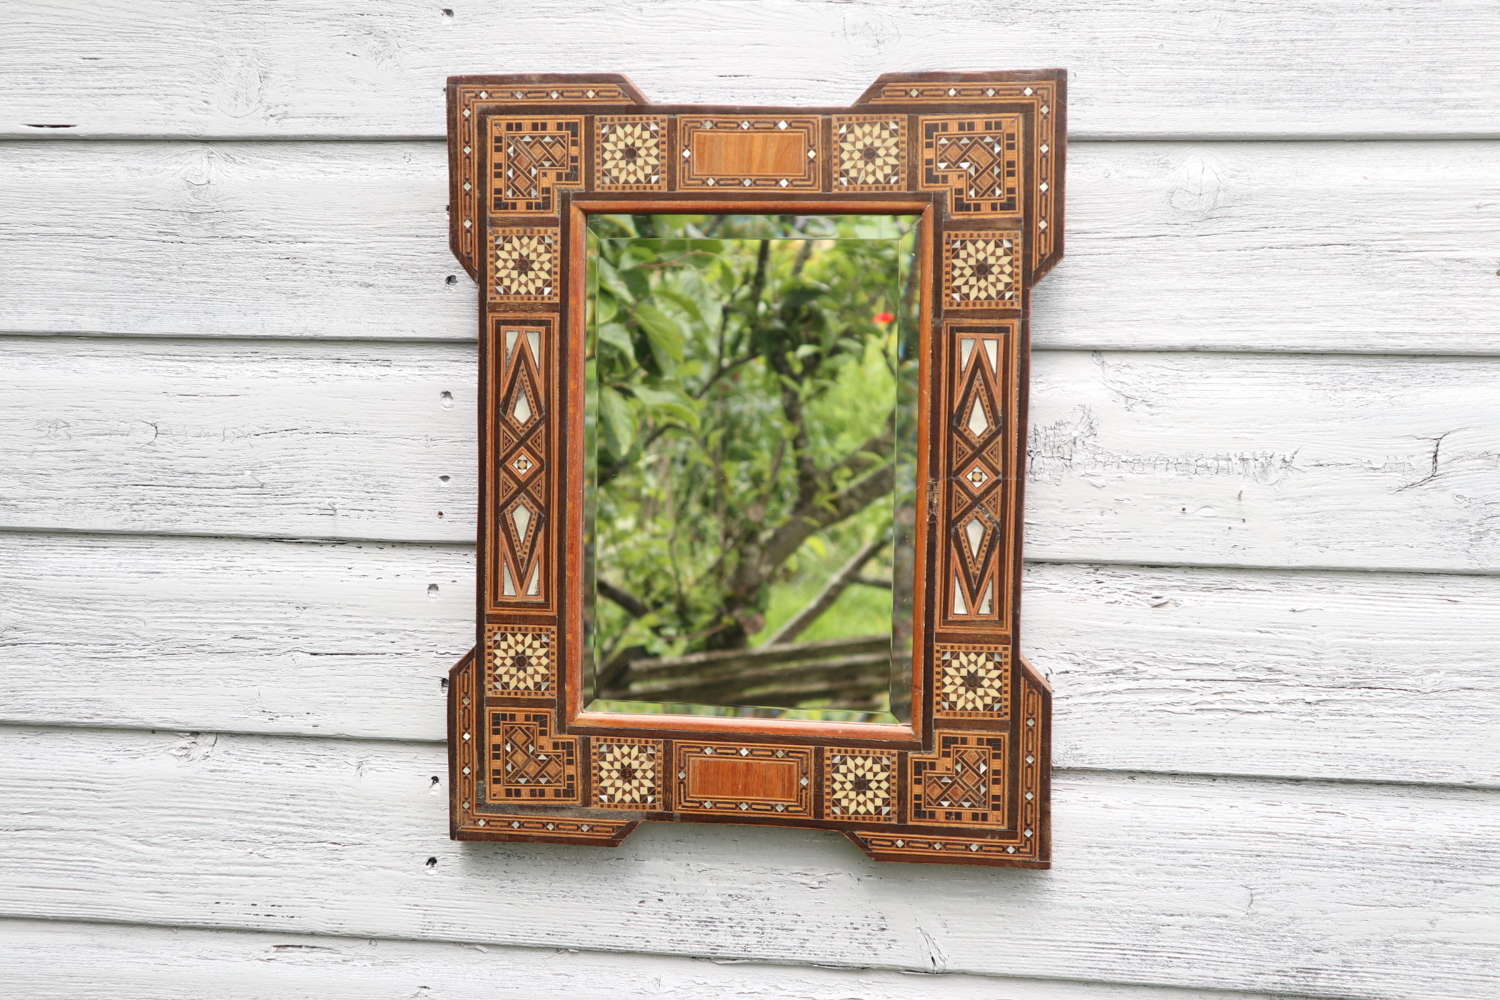 Moroccan, Mother of Pearl mosaic inlay & parquetry frame mirror c.1925